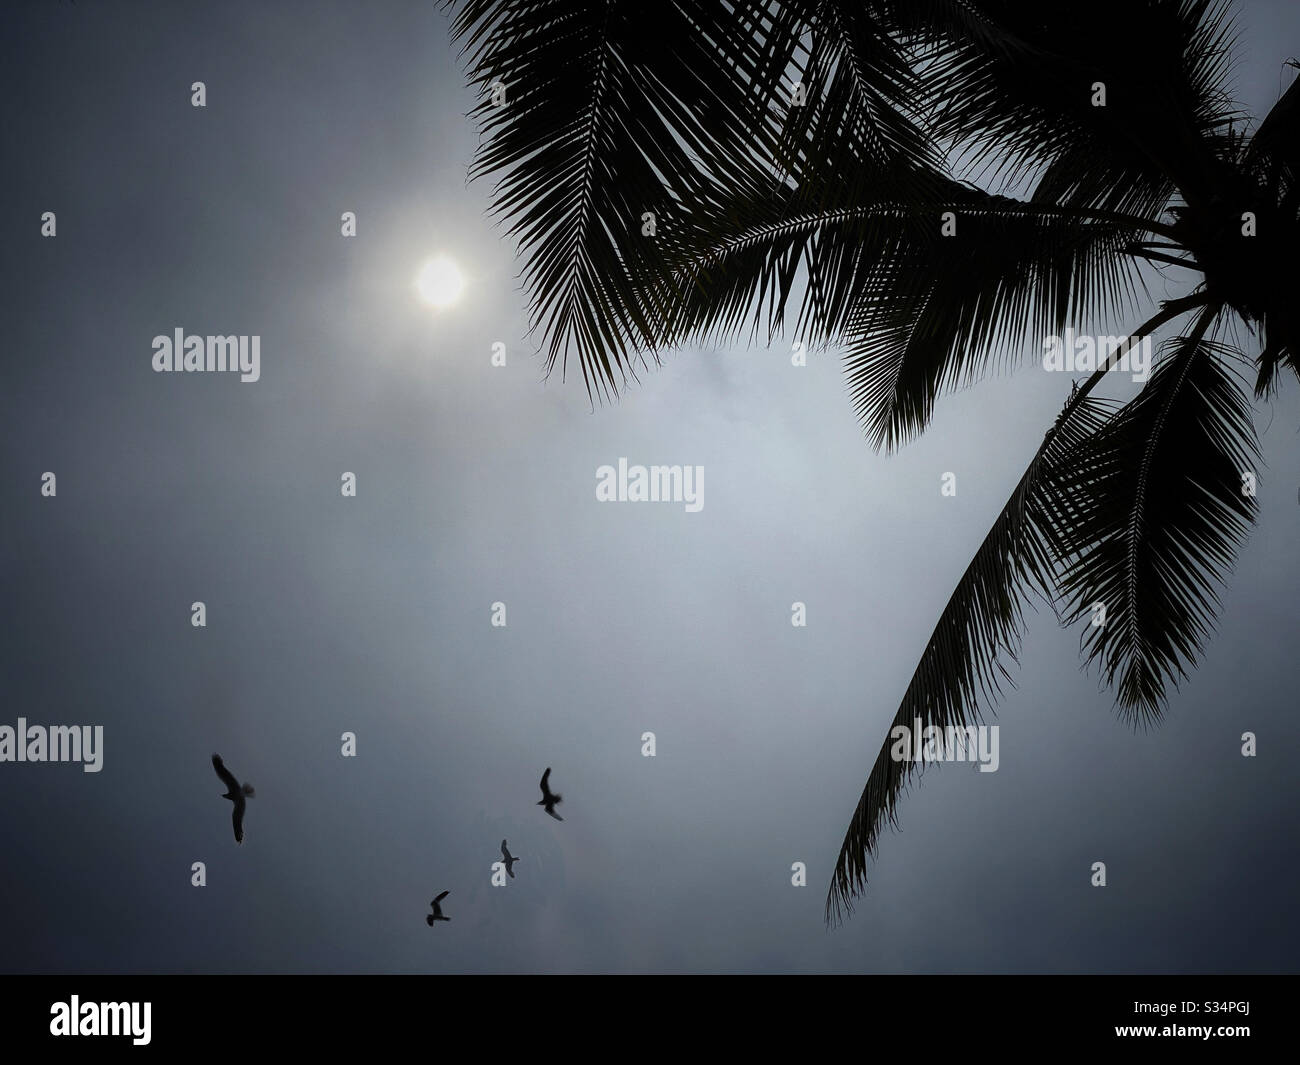 Coconut palm fronds and a group of blackbirds silhouetted against a grey overcast sky Stock Photo